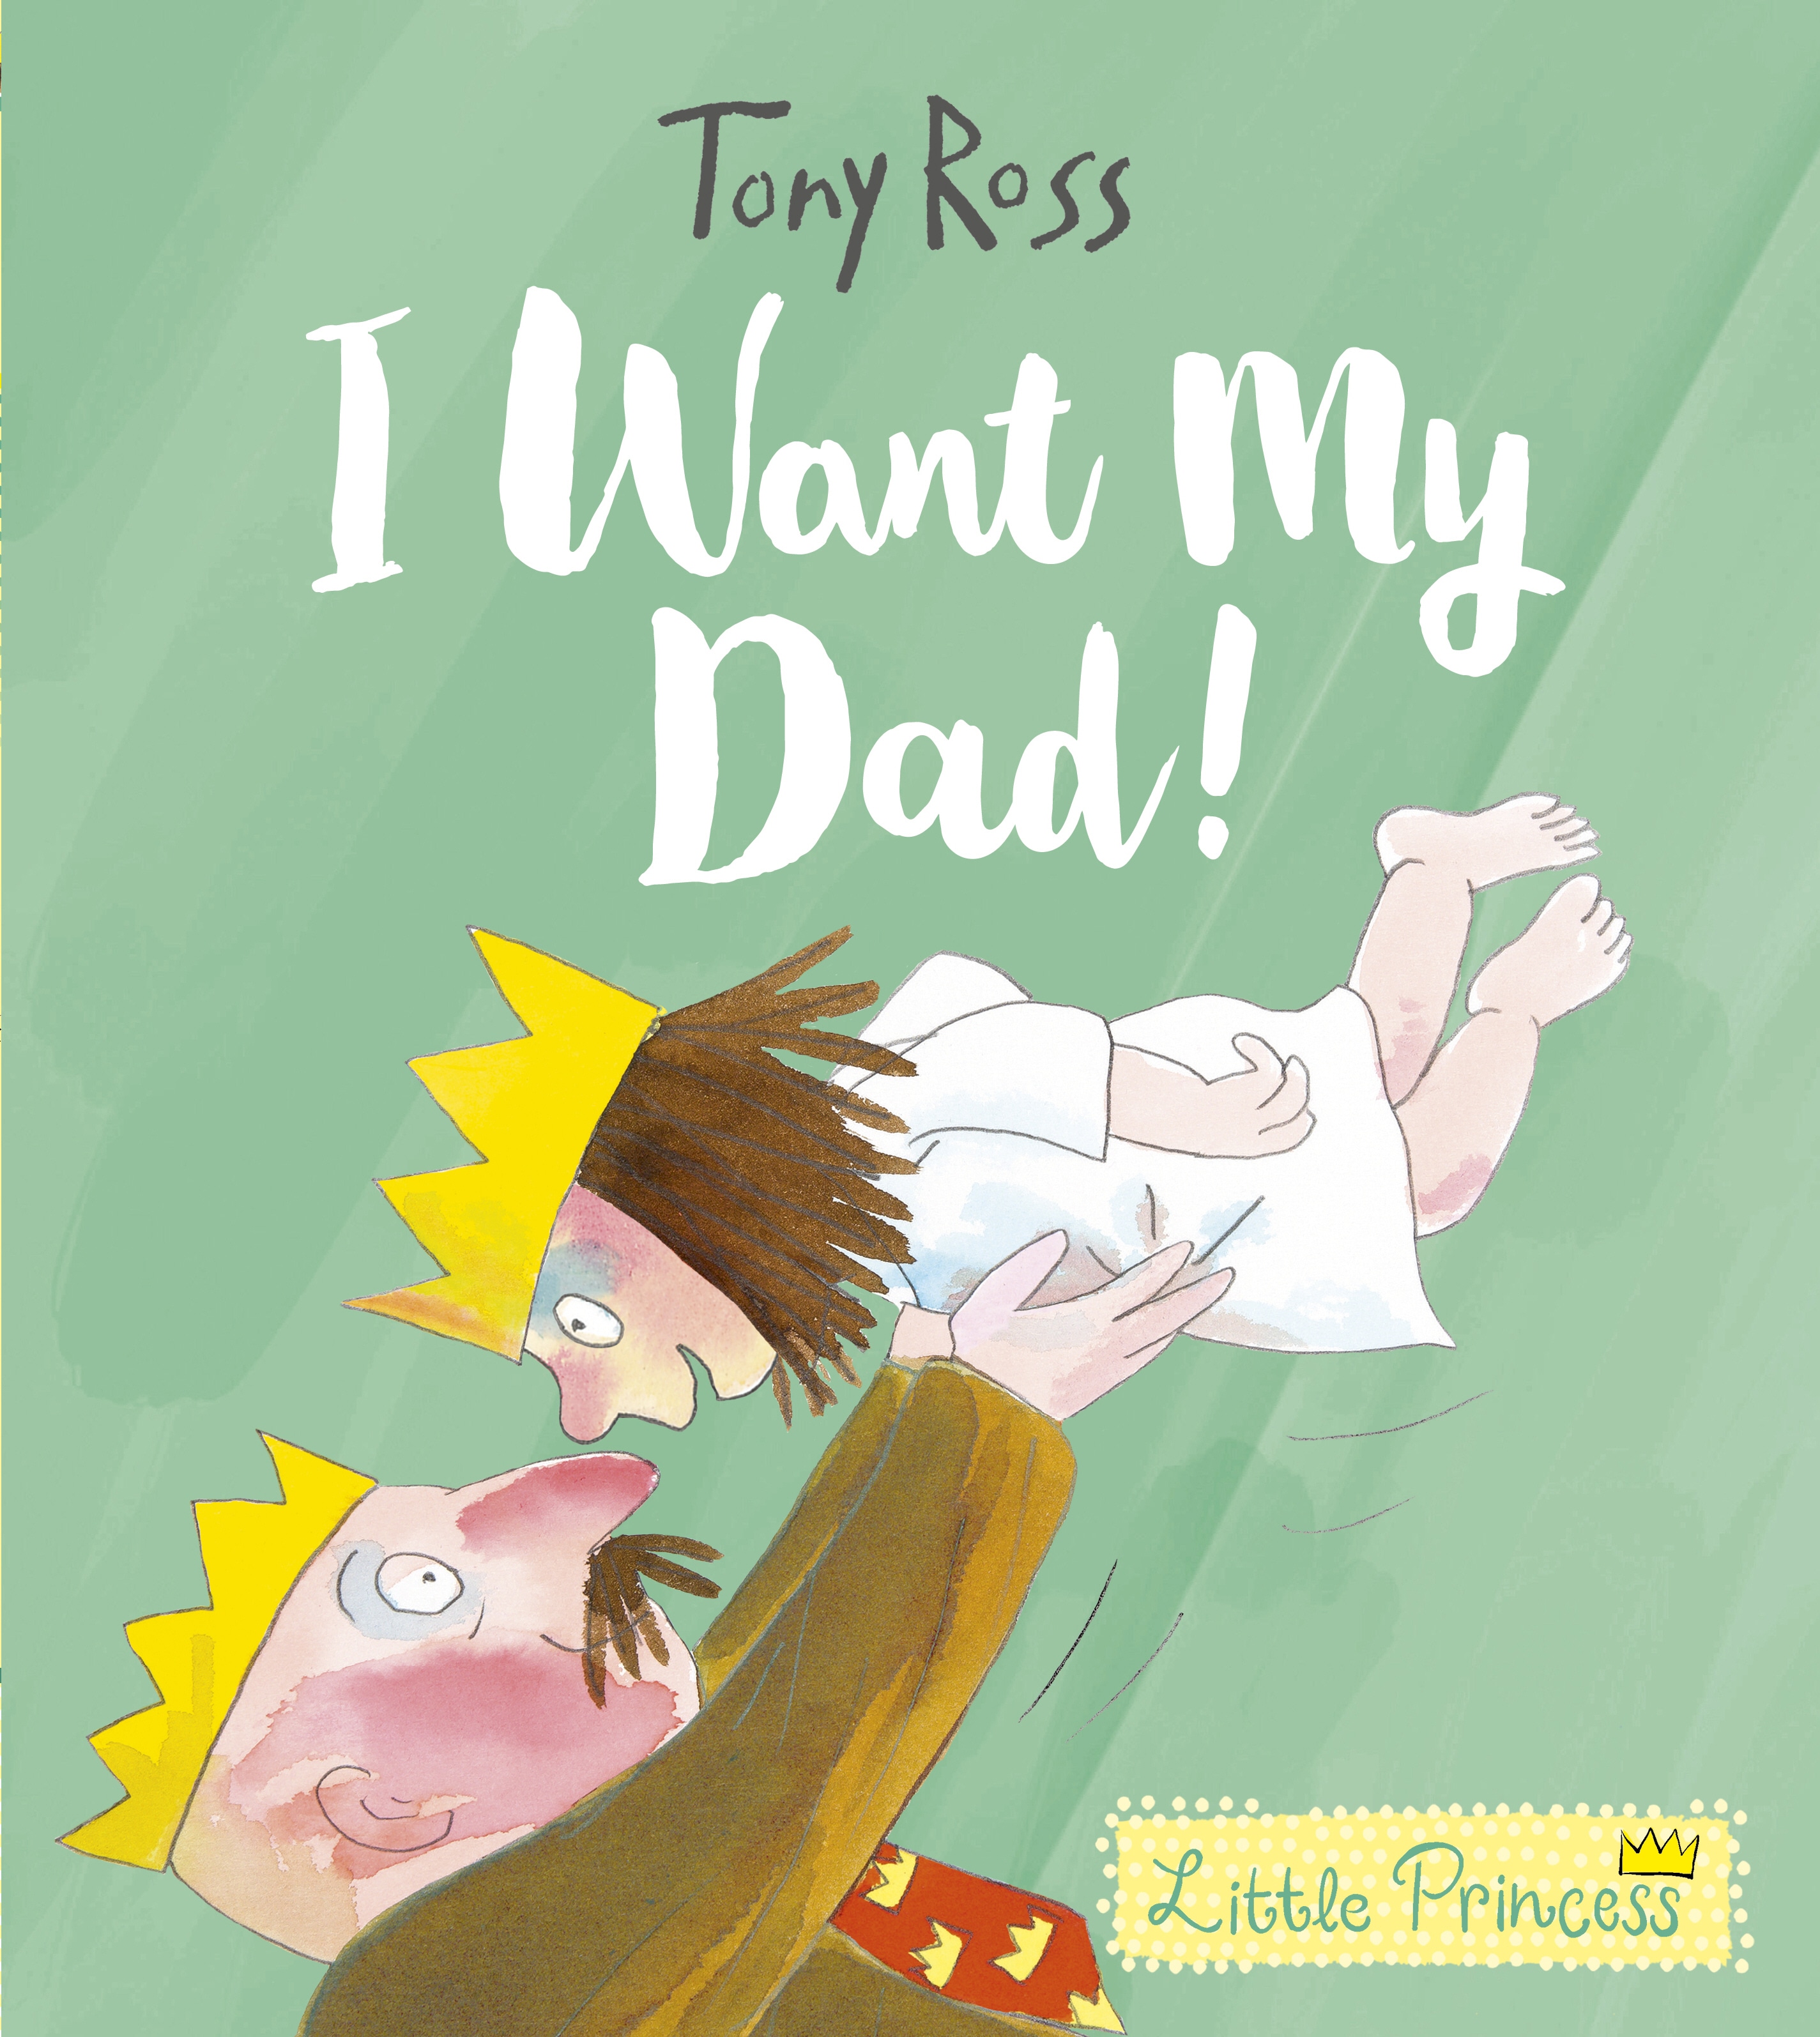 Book “I Want My Dad!” by Tony Ross — May 2, 2019